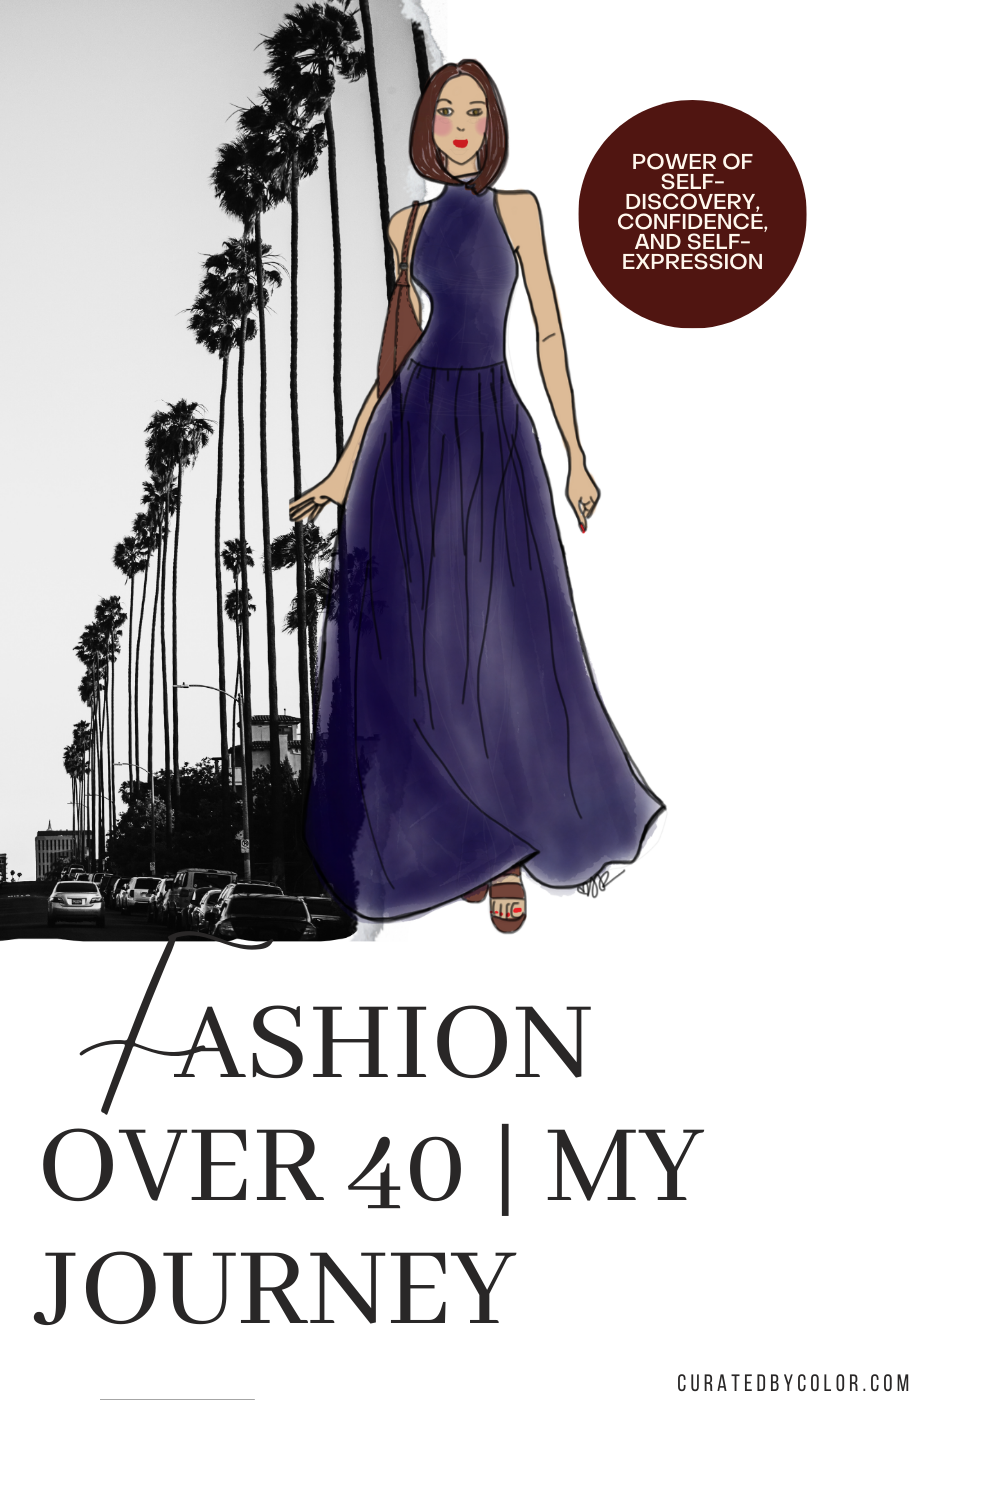 Fashion Over 40: My Journey